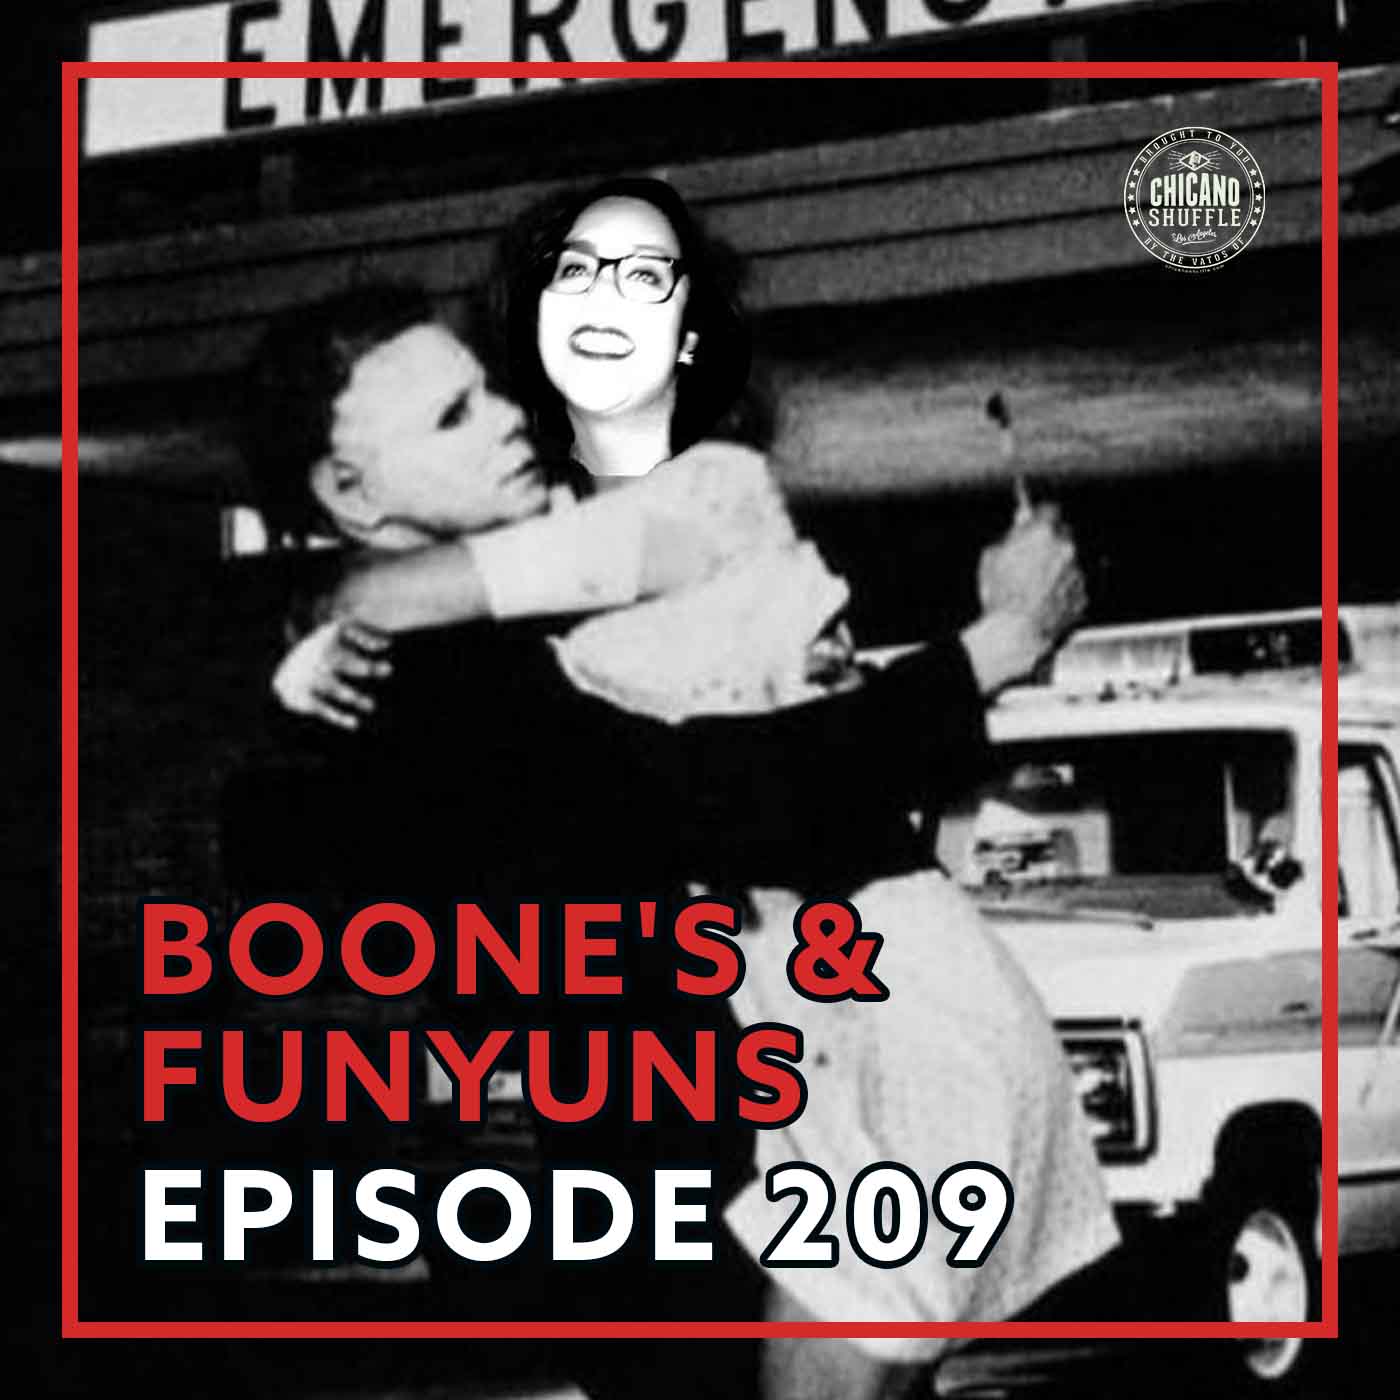 Episode 209 – Boone’s & Funyuns